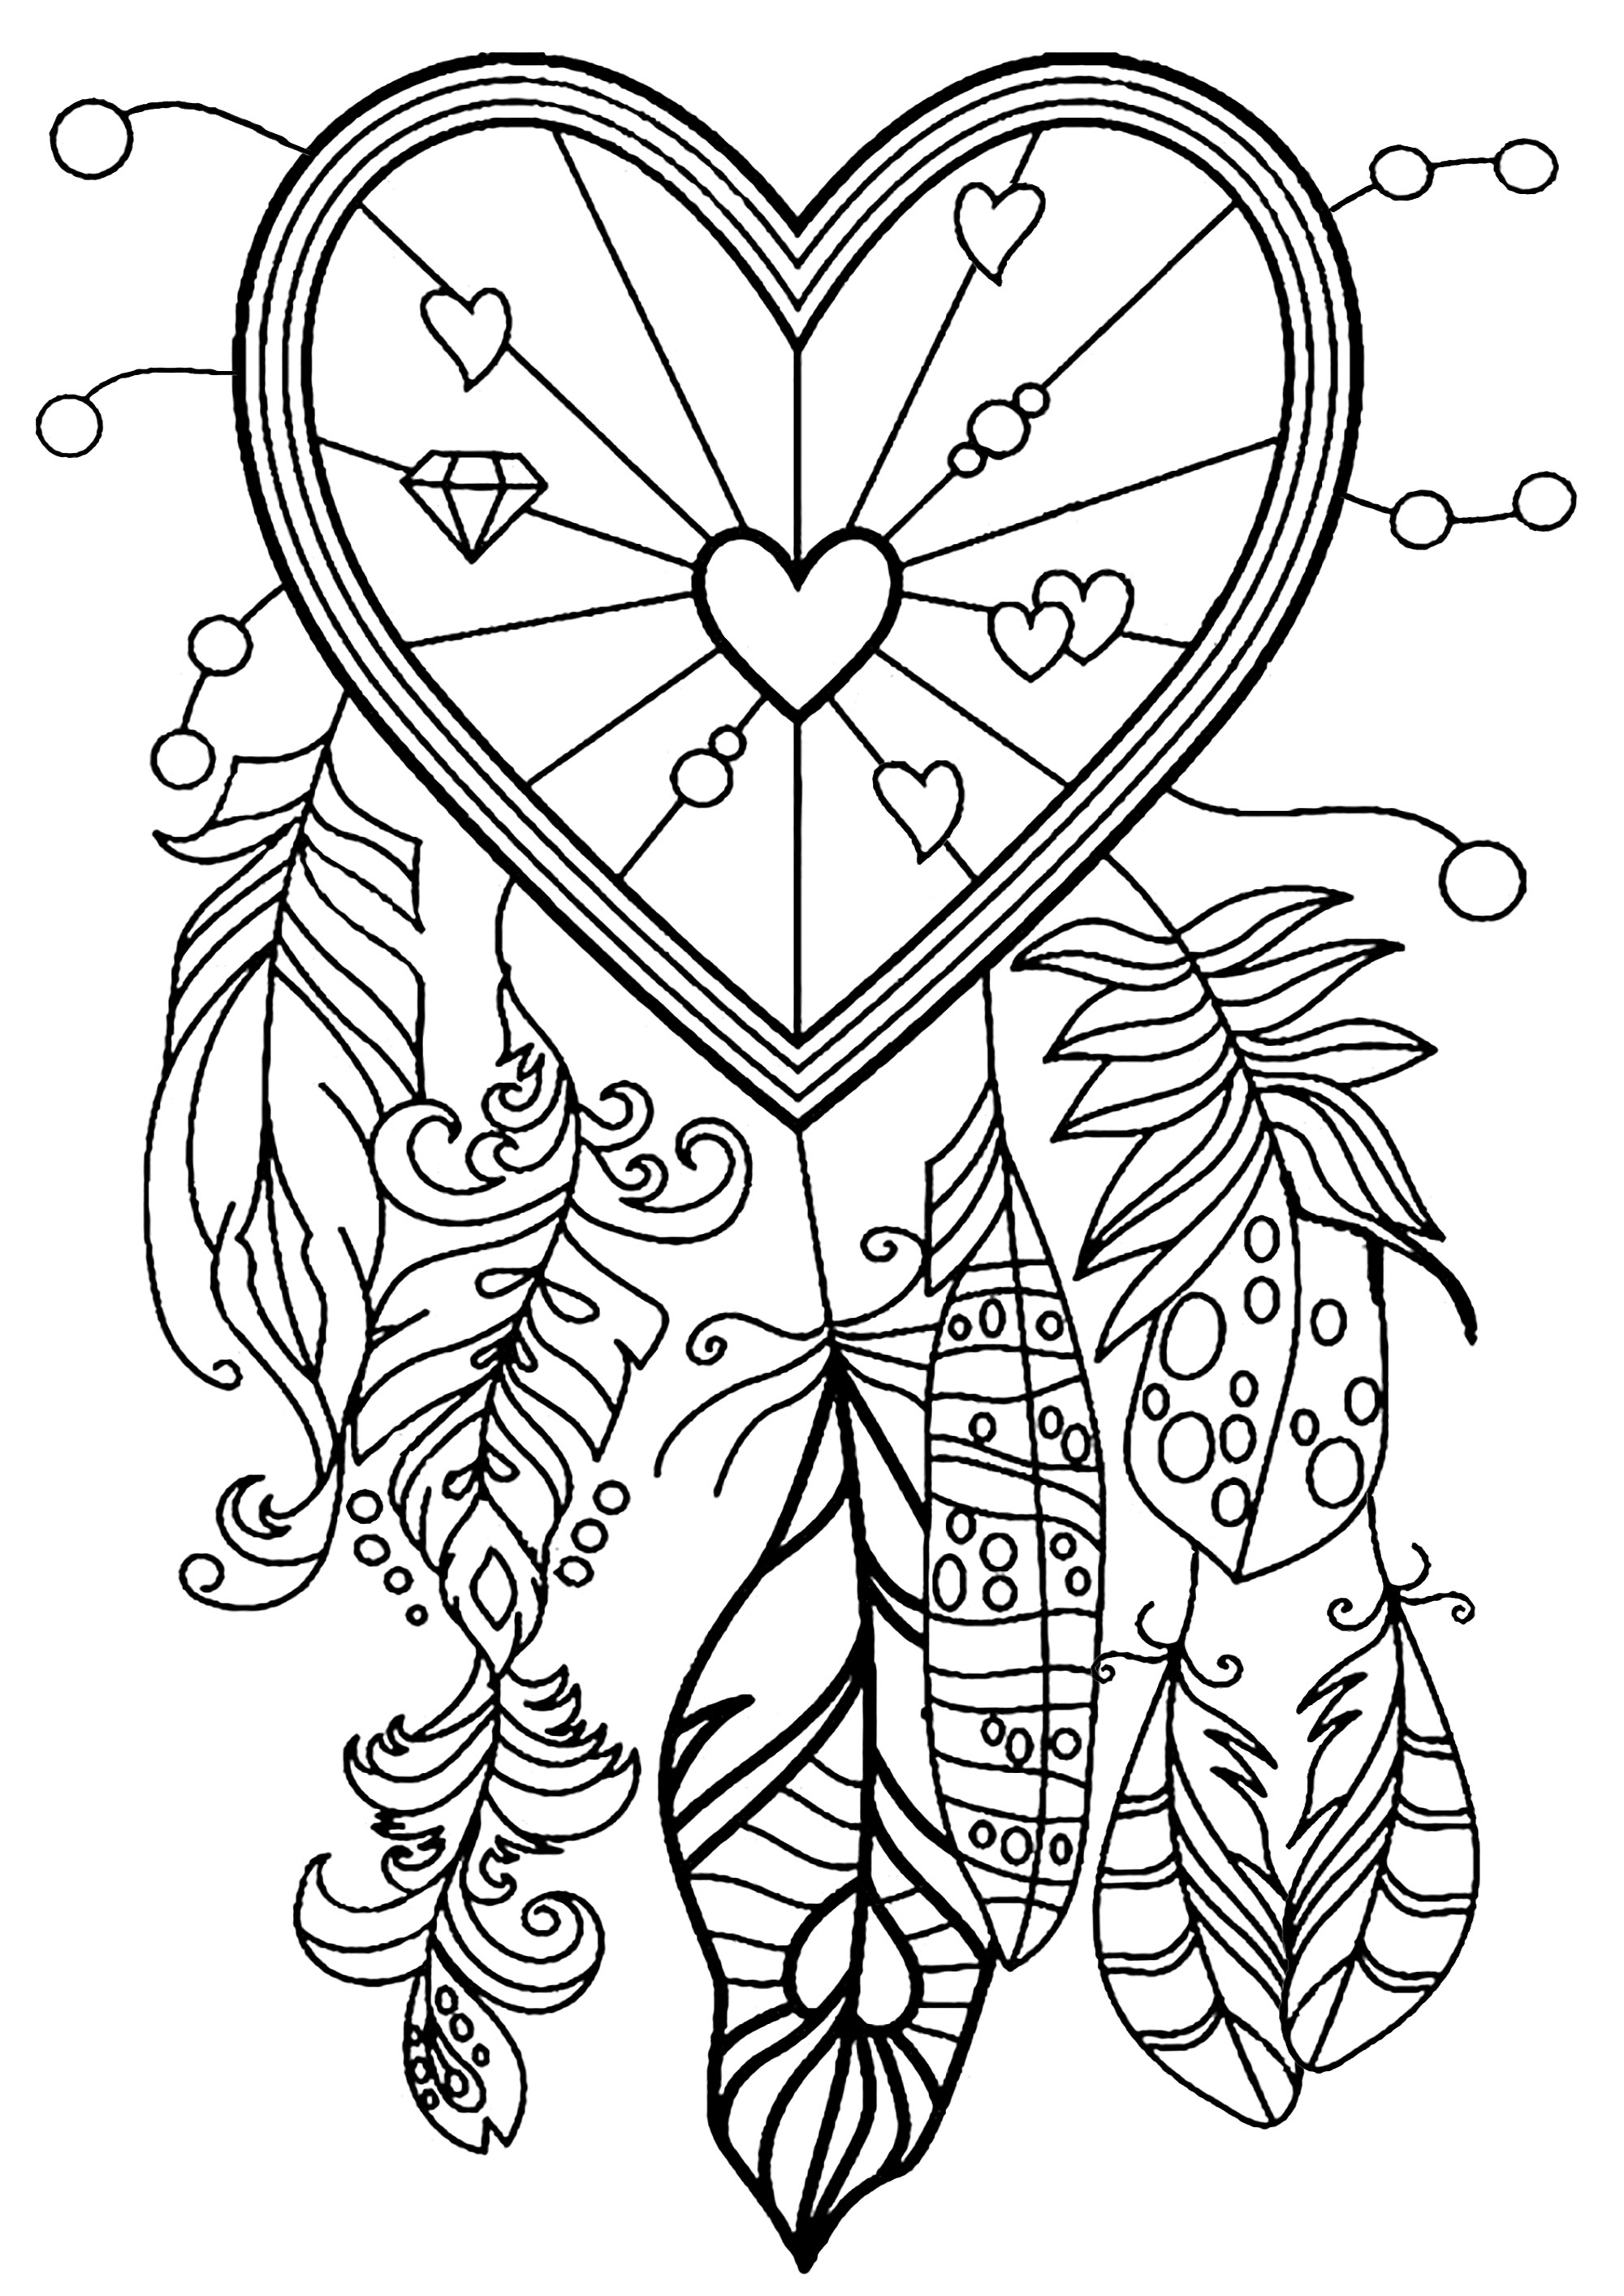 Dreamcatchers with hearts and feathers. A particularly charming and sweet coloring page